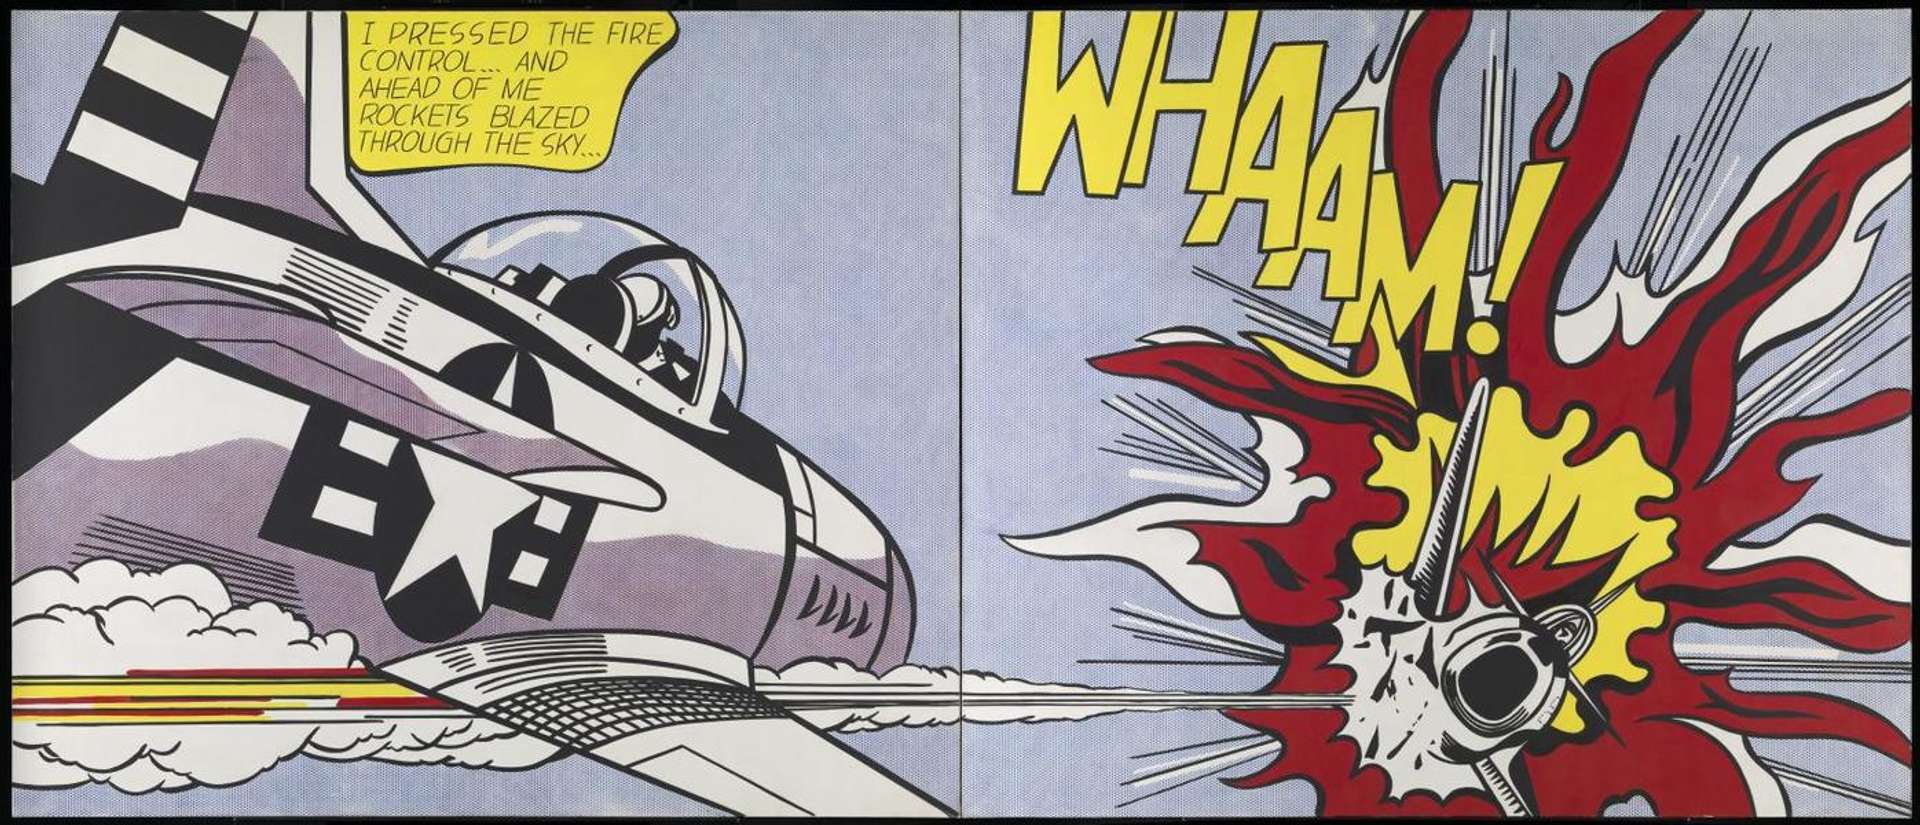 Roy Lichtenstein’s Whaam! A Pop Art lithograph of a comic style work with the text “WHAAM!” in yellow on the right side above an explosive, and a pilot flying a jet on the left side with the text “I PRESSED THE FIRE CONTROL… AND AHEAD OF ME ROCKETS BLAZED THROUGH THE SKY.”